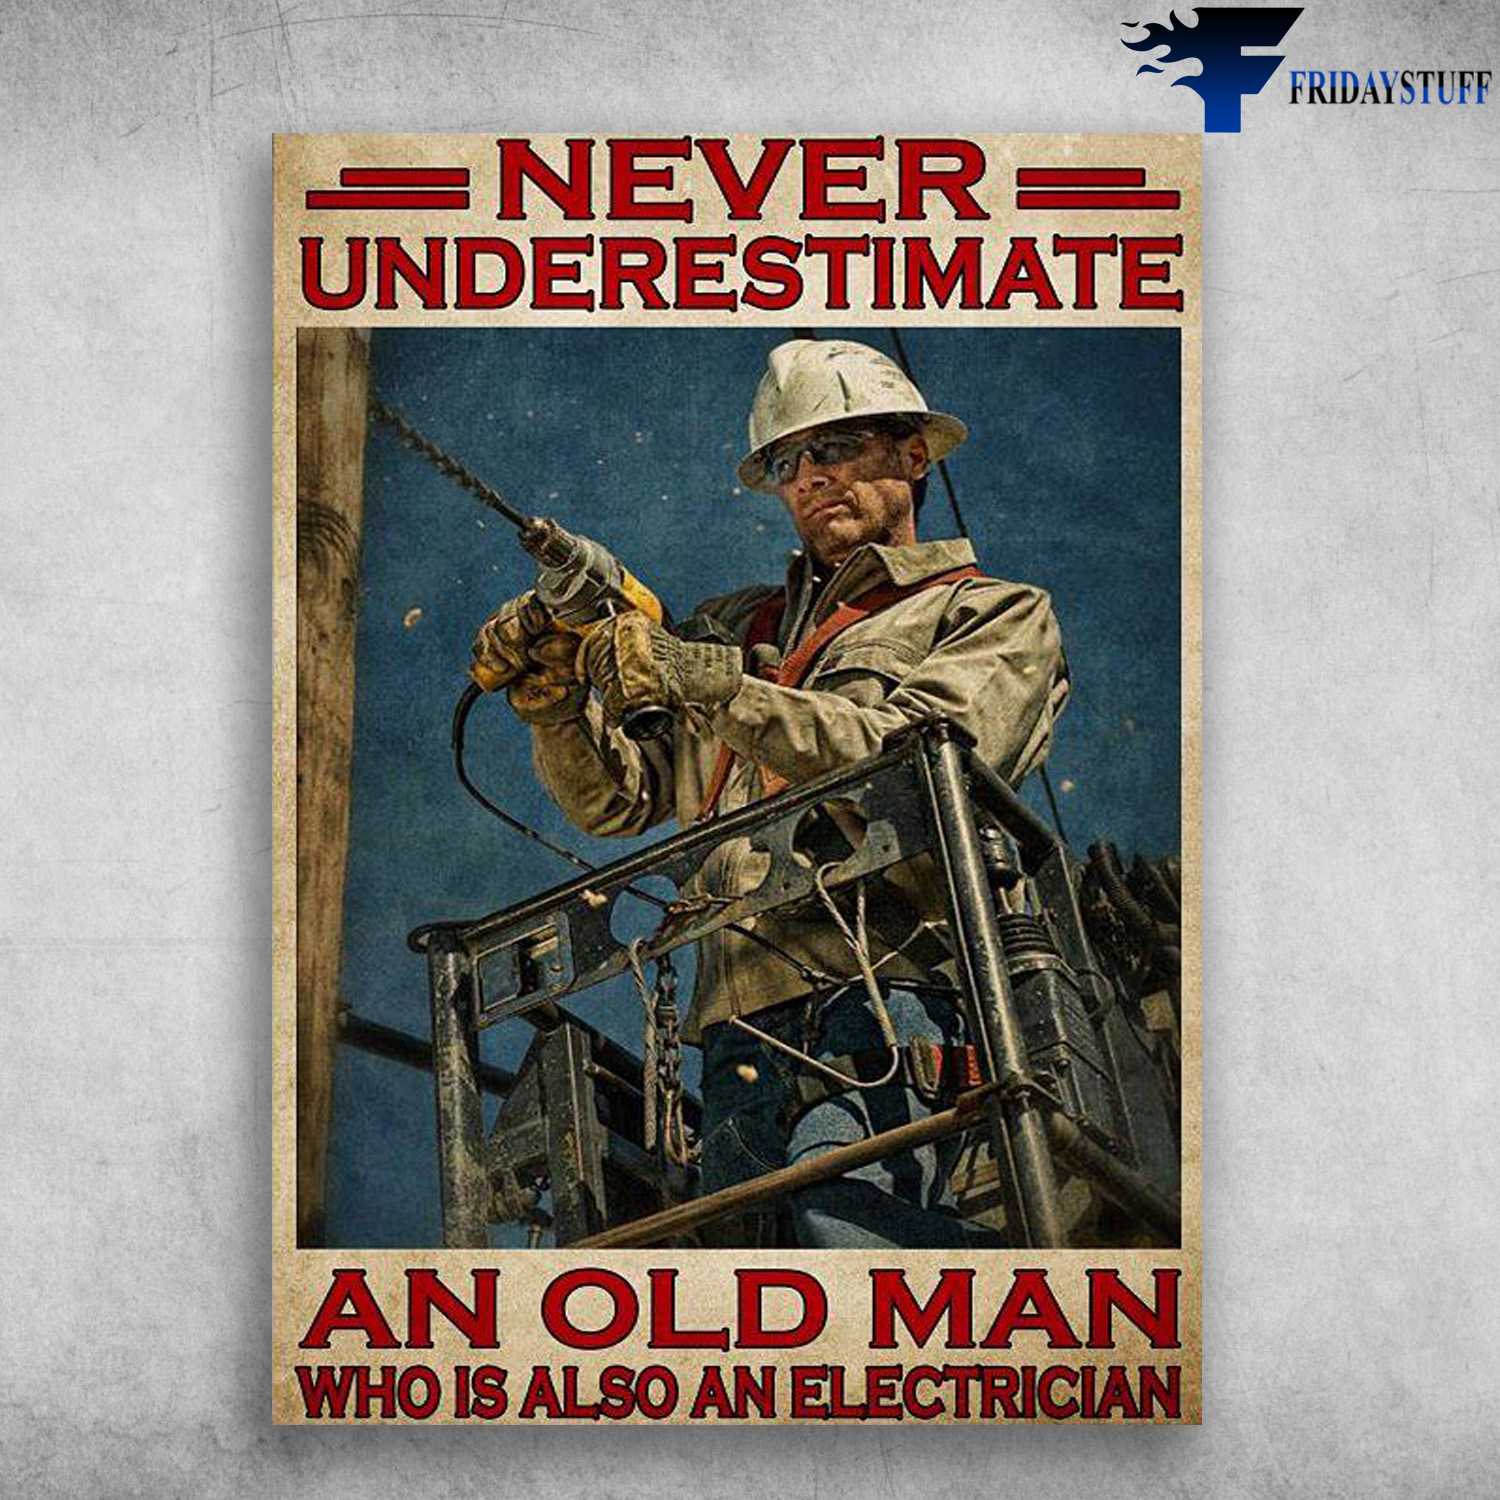 Old Electrician - Never Underestimate, An Old Man, Who Is Also An Electrician